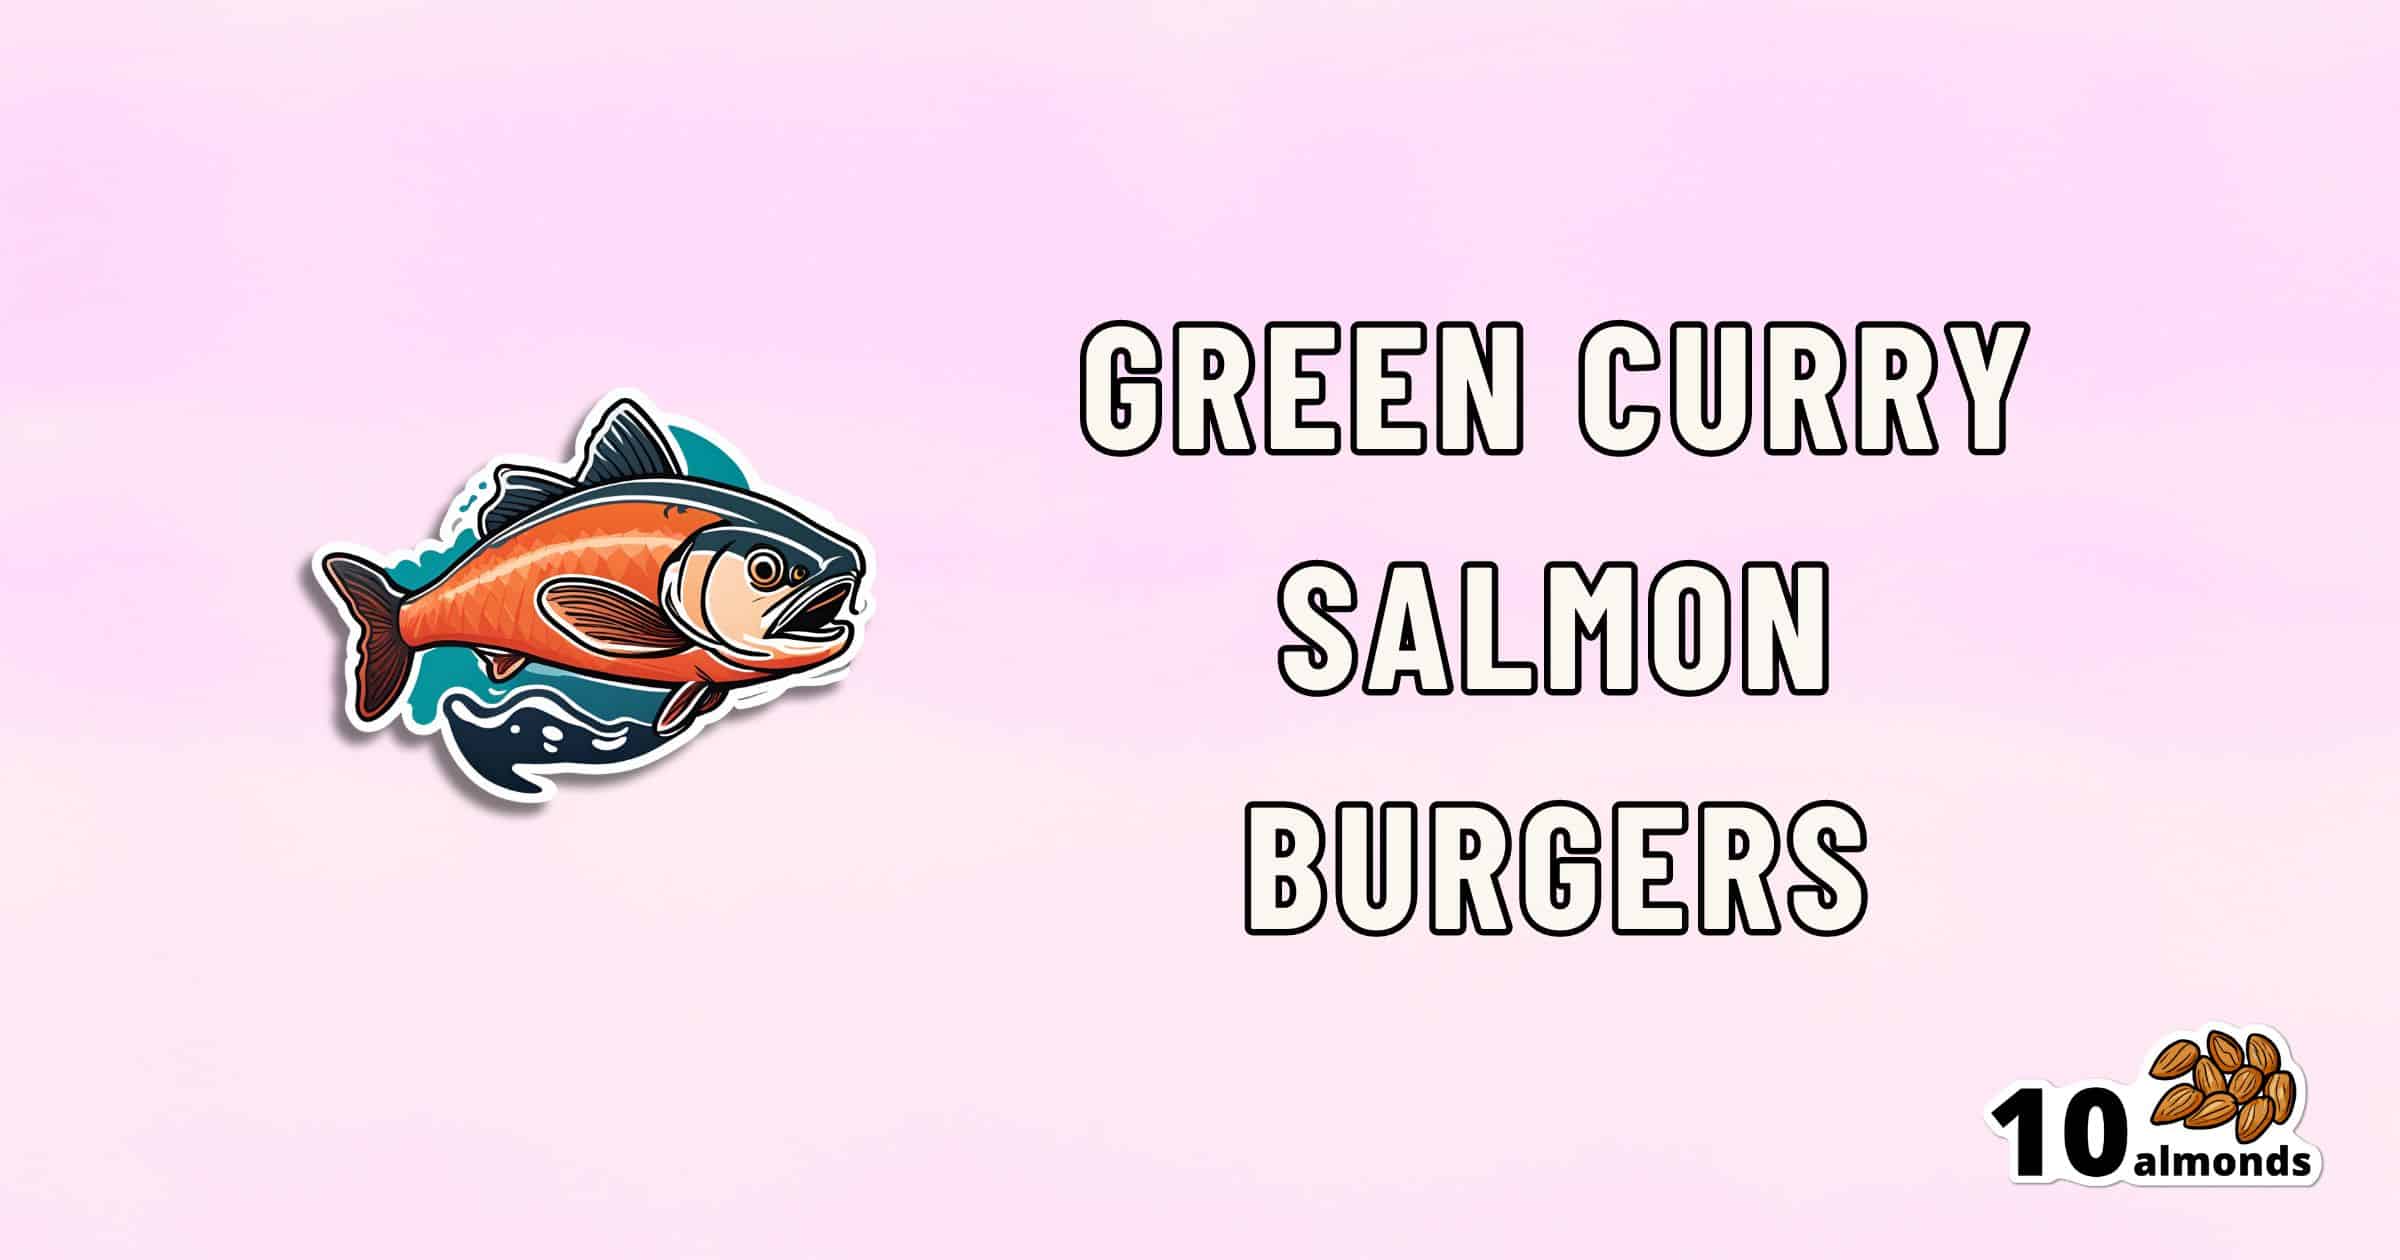 An image with a pink gradient background. A graphic of a fish is on the left, and text on the right reads: "Green Curry Salmon Burgers." In the bottom right corner, there is a small illustration of 10 almonds with the number "10 almonds" next to it.